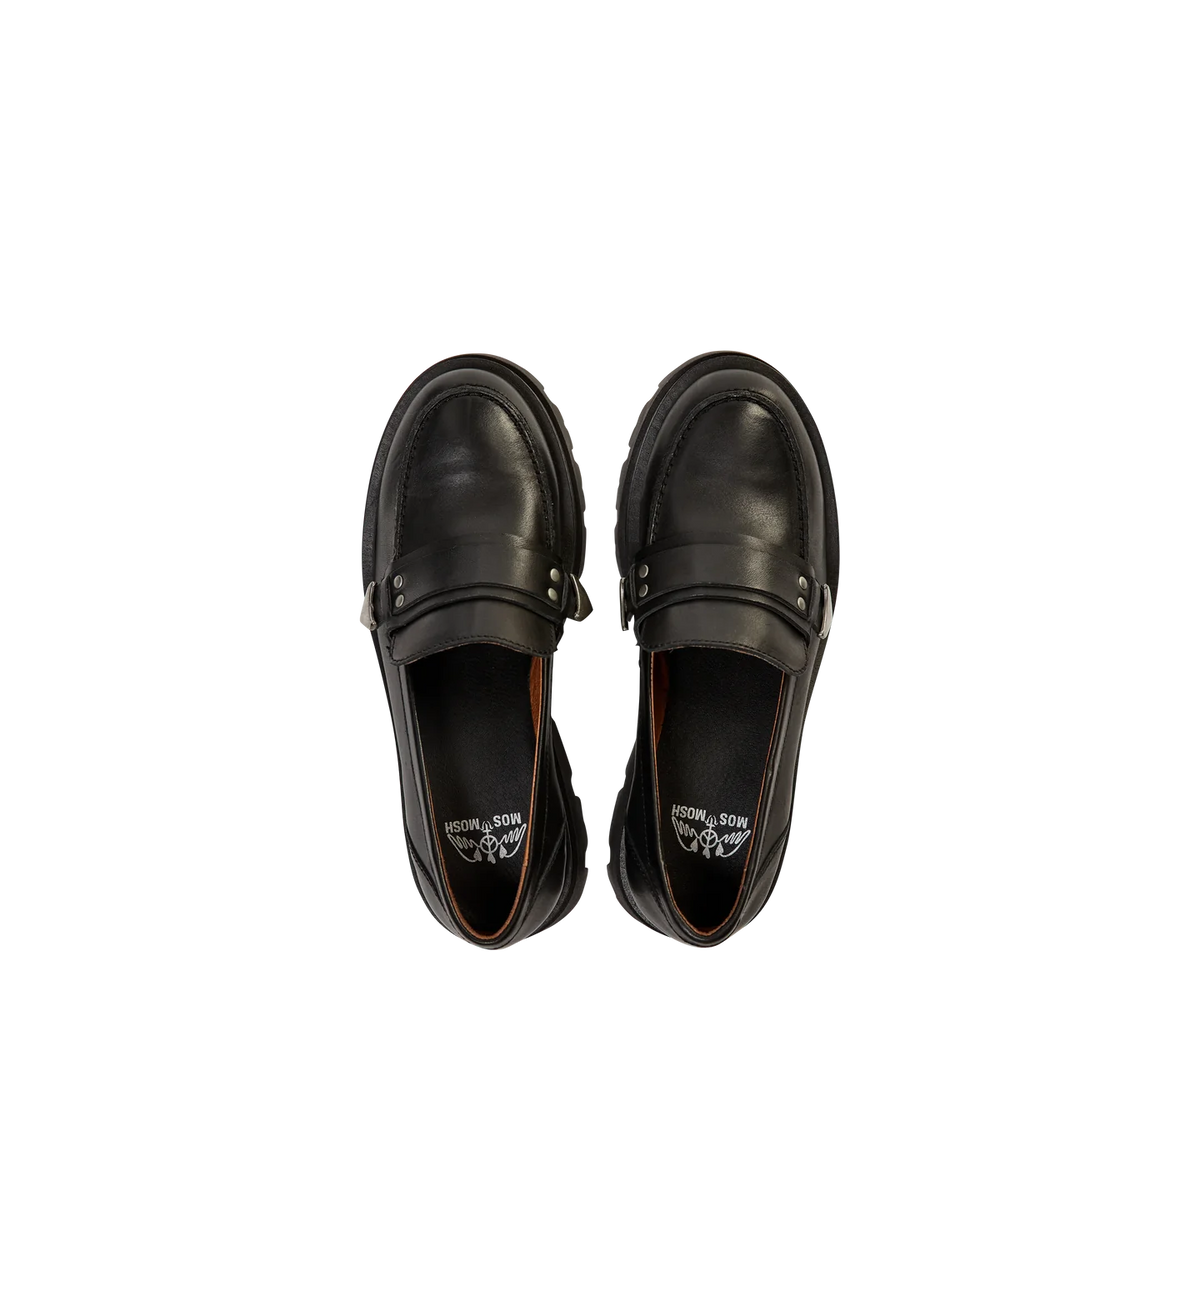 Costa Rica Leather Loafer - Black